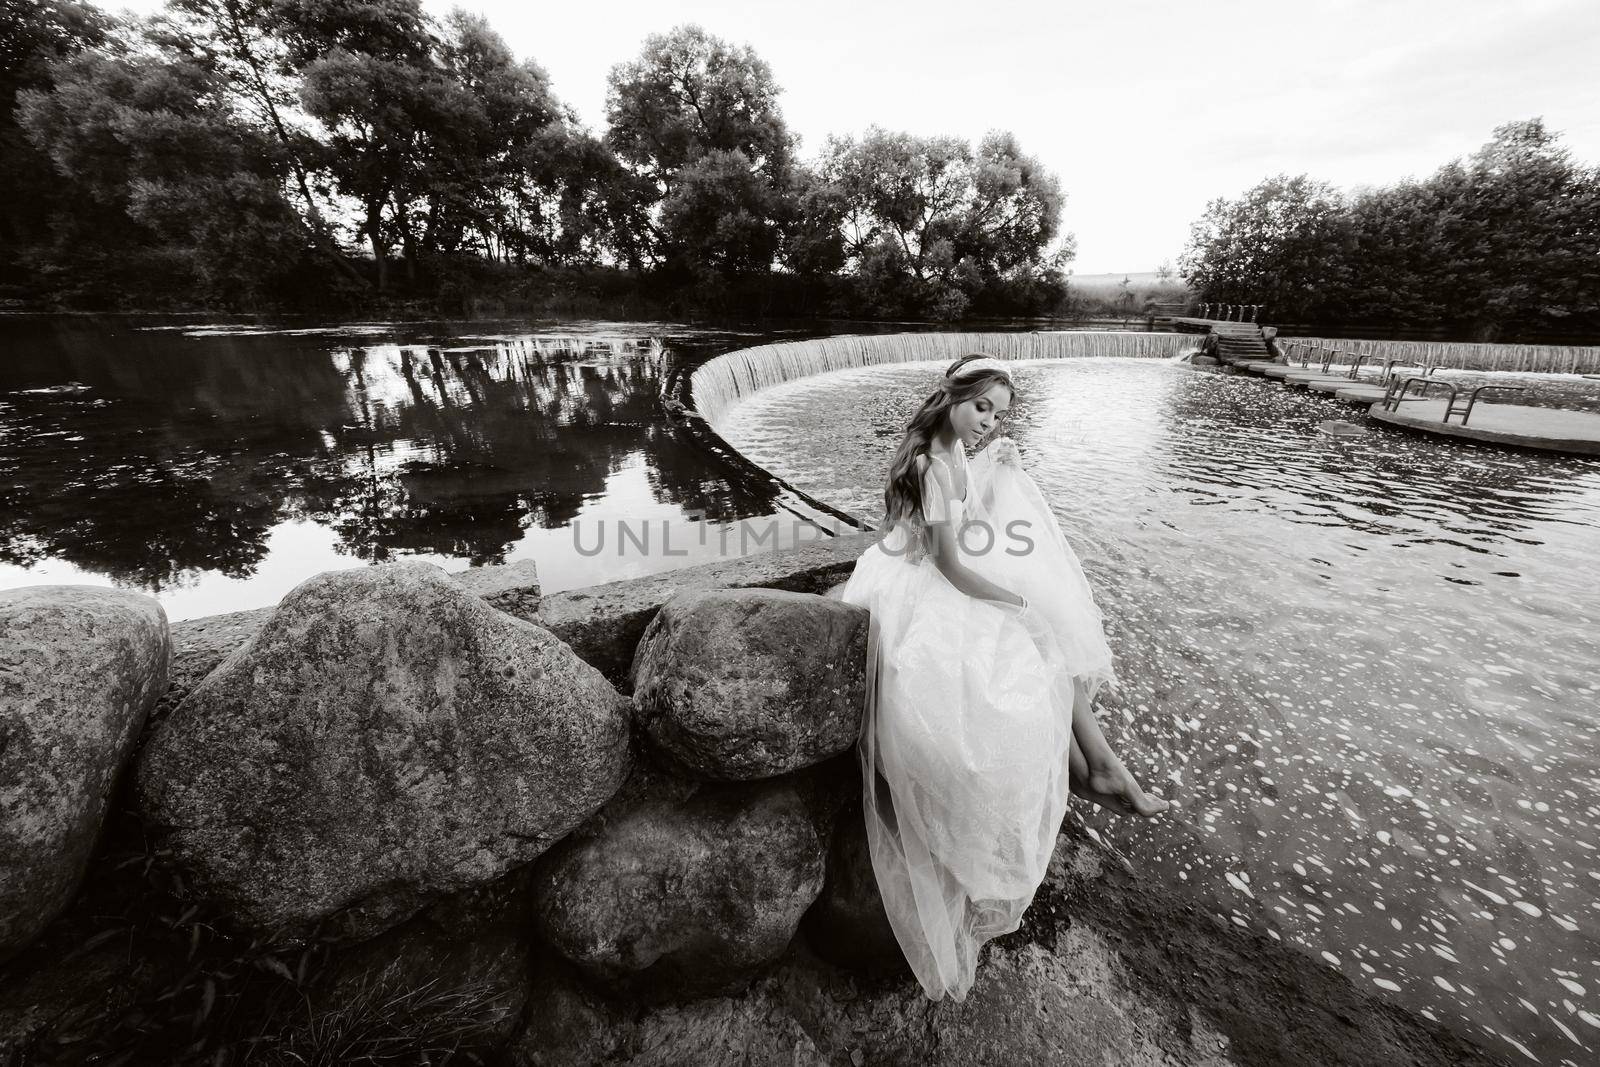 An elegant bride in a white dress, gloves and bare feet is sitting near a waterfall in the Park enjoying nature.A model in a wedding dress and gloves at a nature Park.Belarus.black and white photo